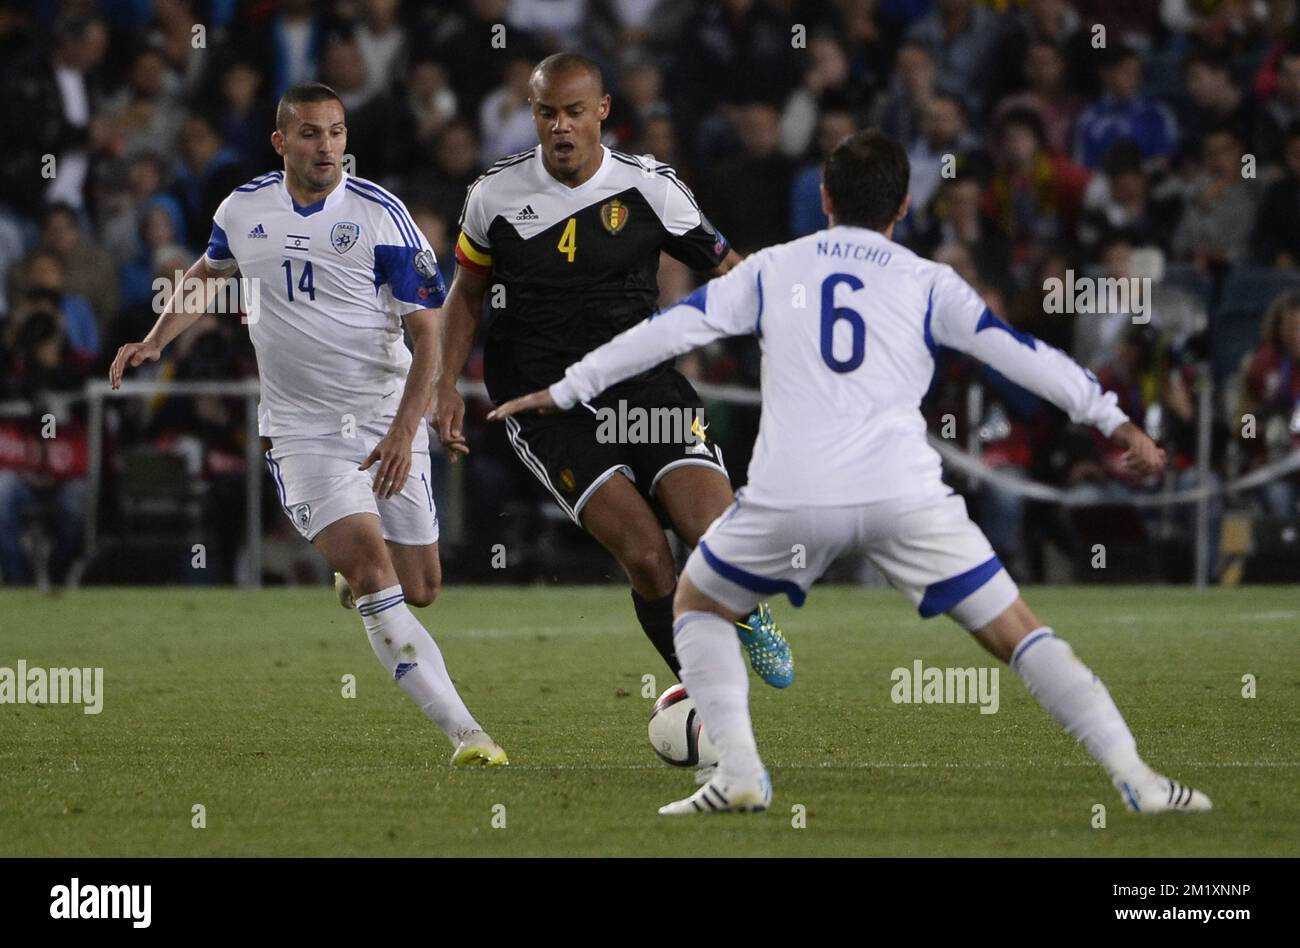 20150331 - BRUSSELS, BELGIUM: Israel's Ben Sahar, Belgium's Vincent Kompany and Israel's Bibras Natkho pictured in action during a qualification game between Israel and Belgian national soccer team Red Devils, Tuesday 31 March 2015, in the Teddy Stadium in Jerusalem, Israel. Belgium plays its fifth game of the Euro 2016 qualification. BELGA PHOTO DIRK WAEM Stock Photo